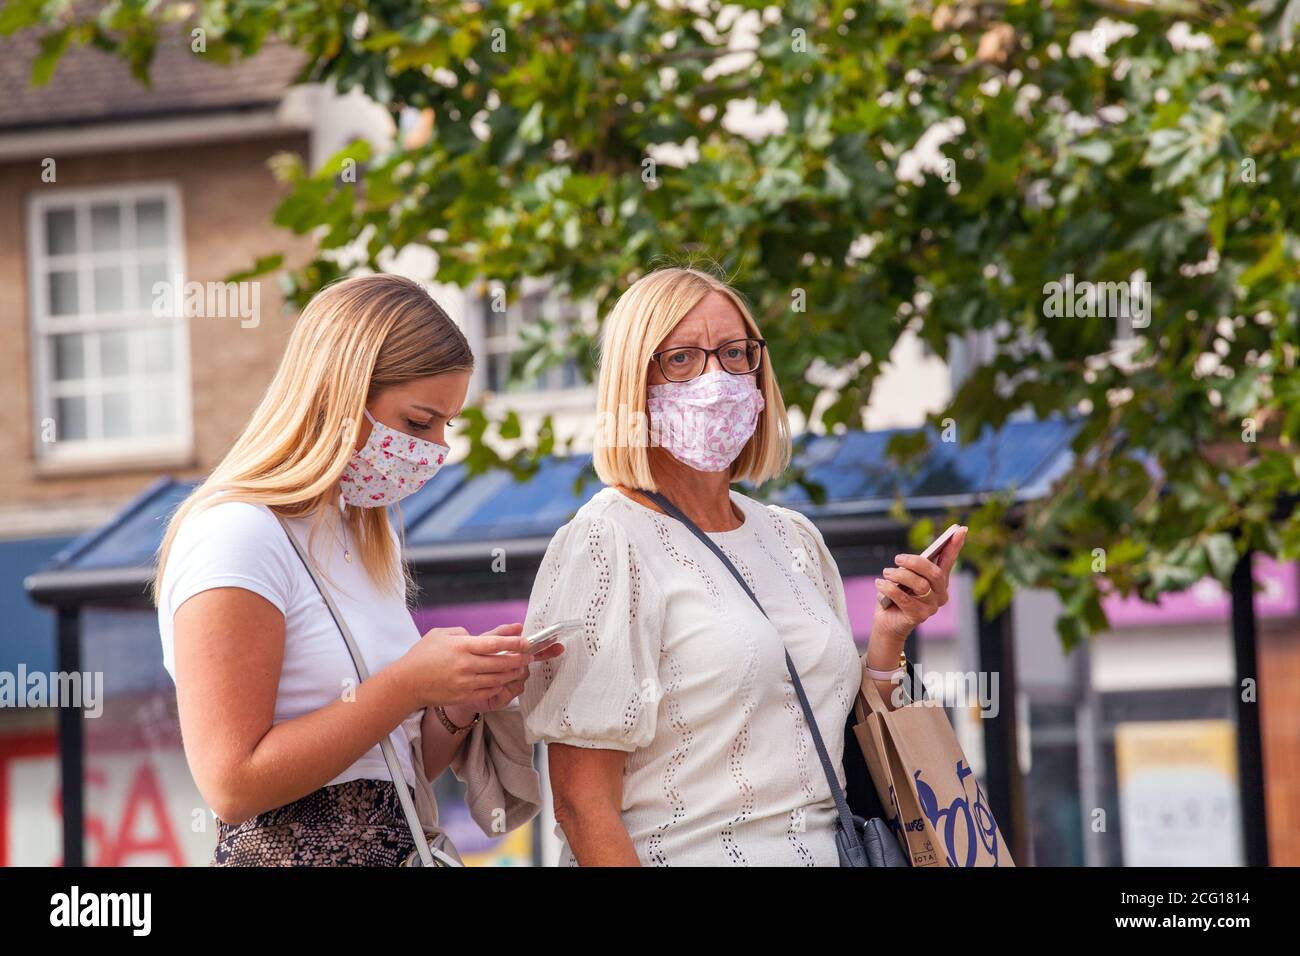 Two women wearing matching face mask covering using mobile phones during the Covid 19 pandemic Stock Photo